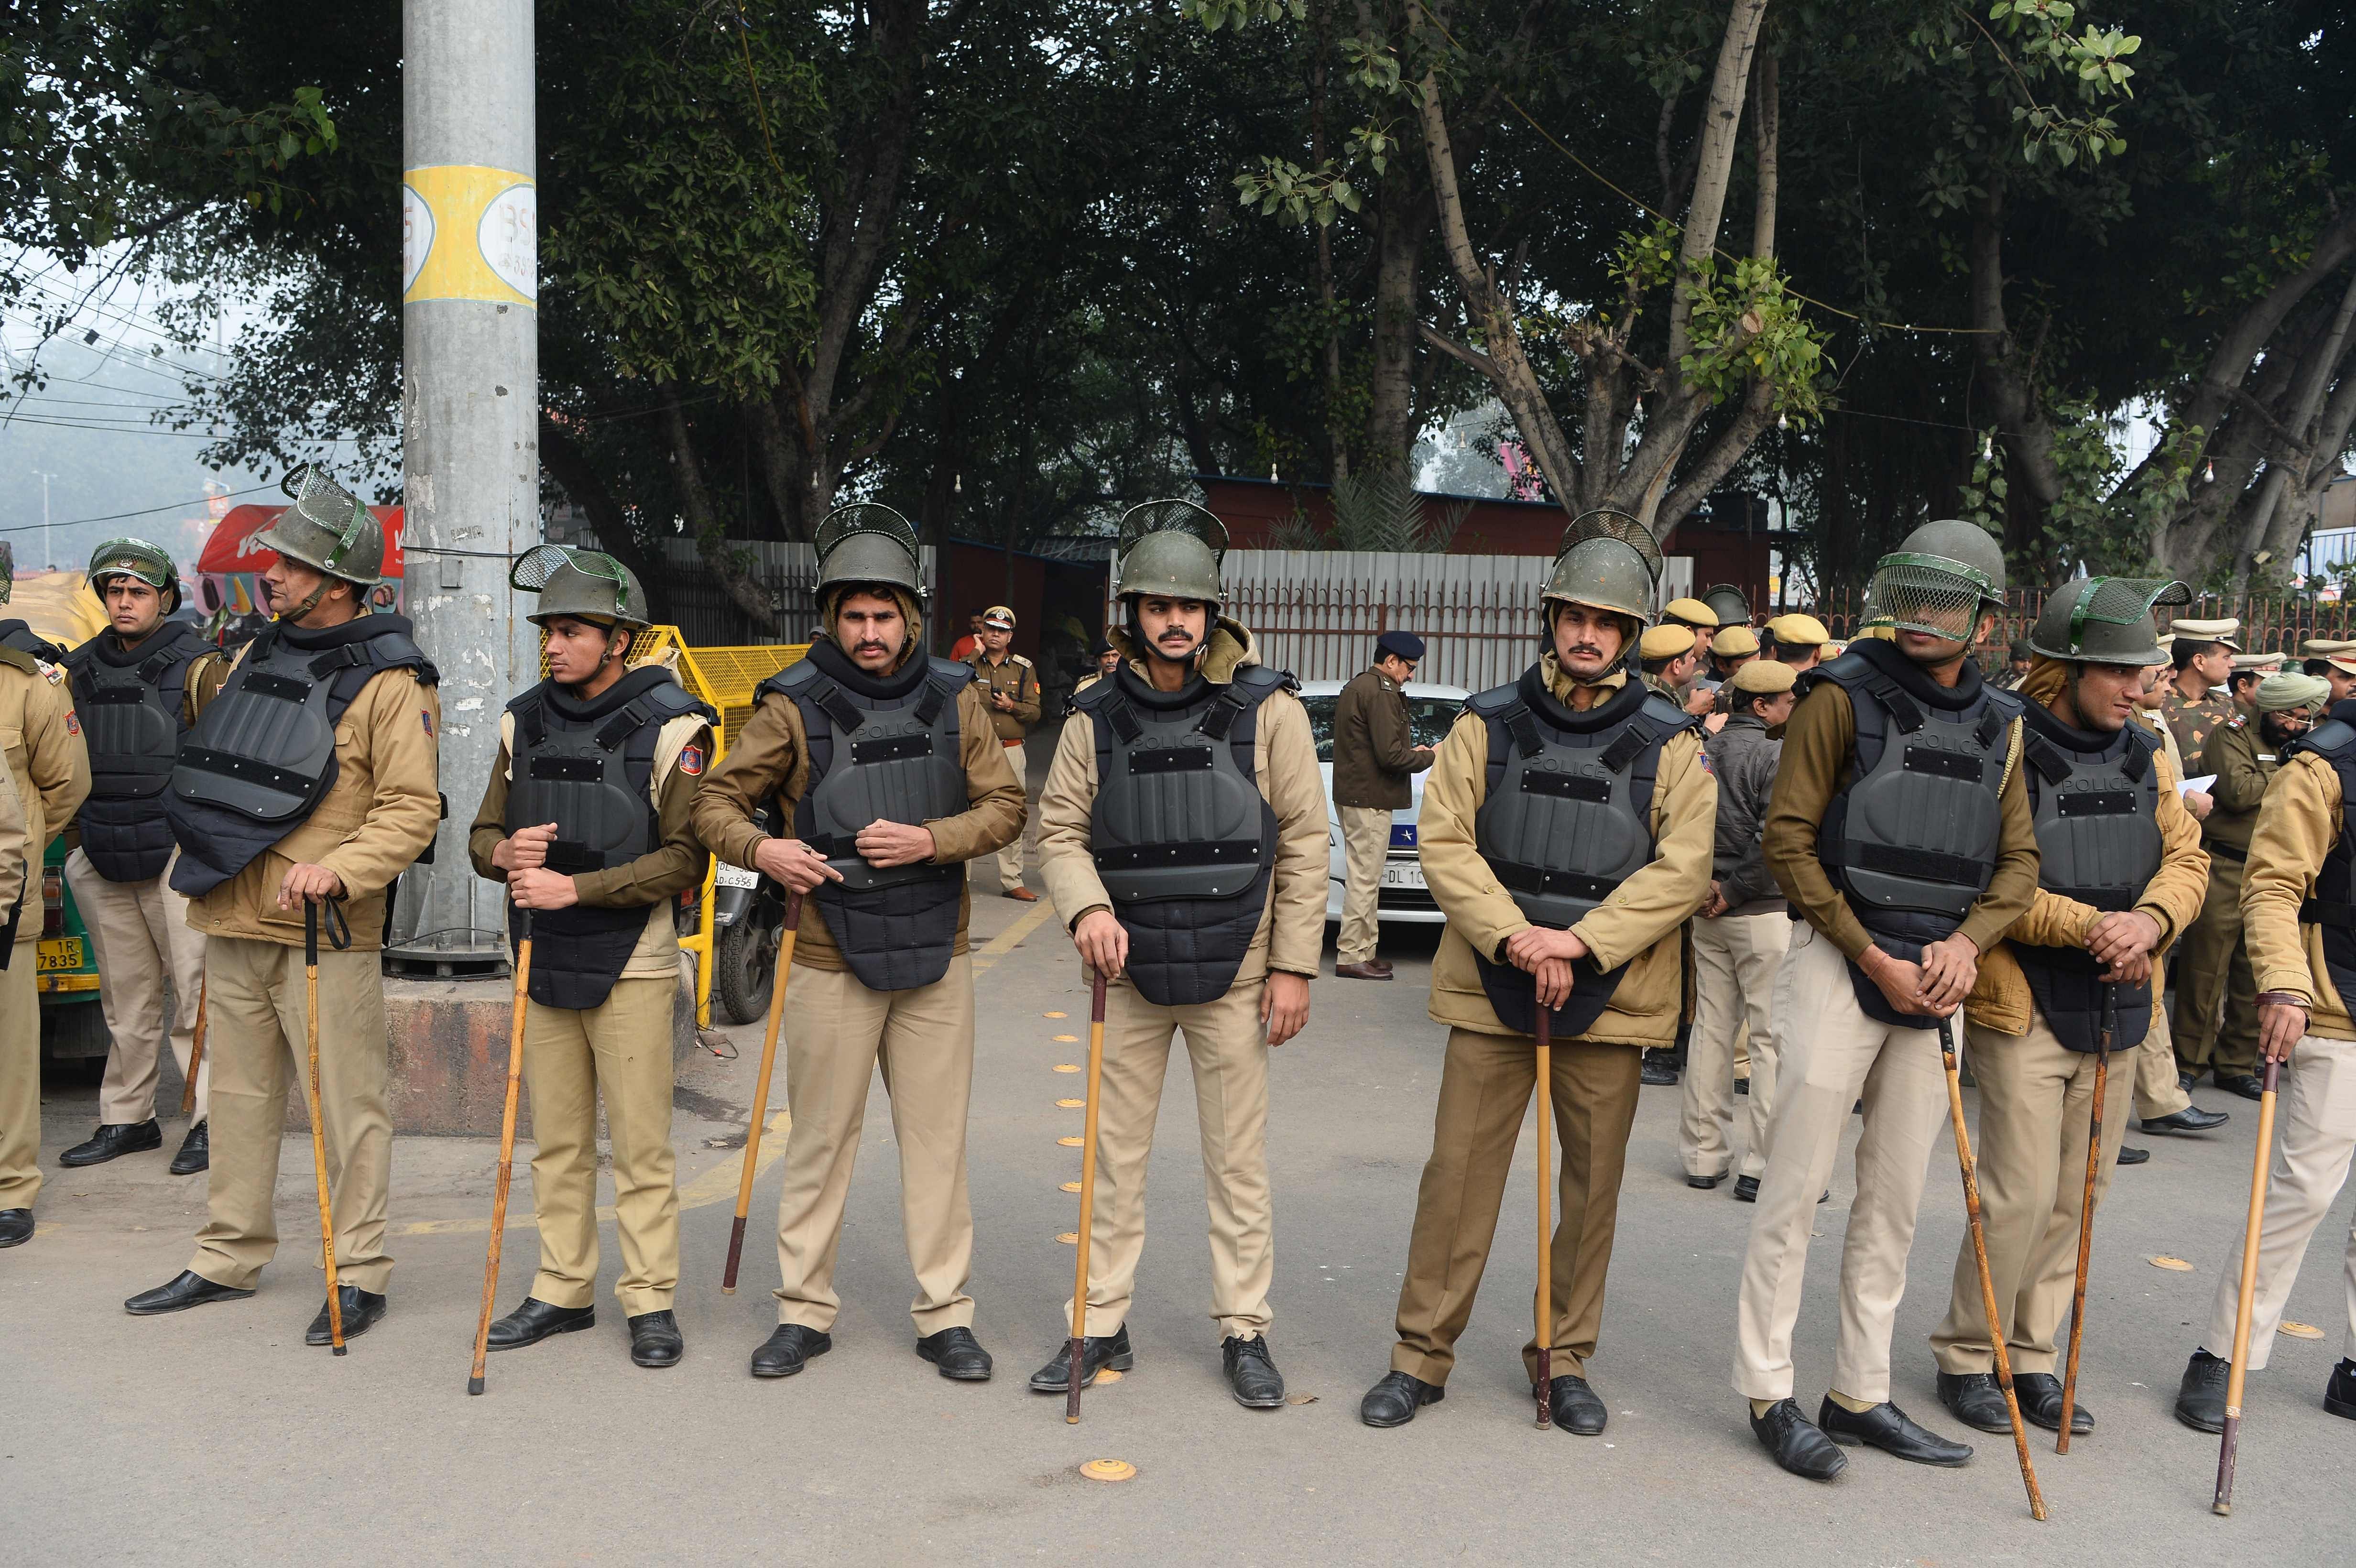 Police gather near the historic Red Fort at a demonstration against India’s new citizenship law in New Delhi on December 19, 2019. - Big rallies are expected across India on December 19 as the tumultuous and angry reaction builds against a citizenship law seen as discriminatory against Muslims. (AFP Photo)